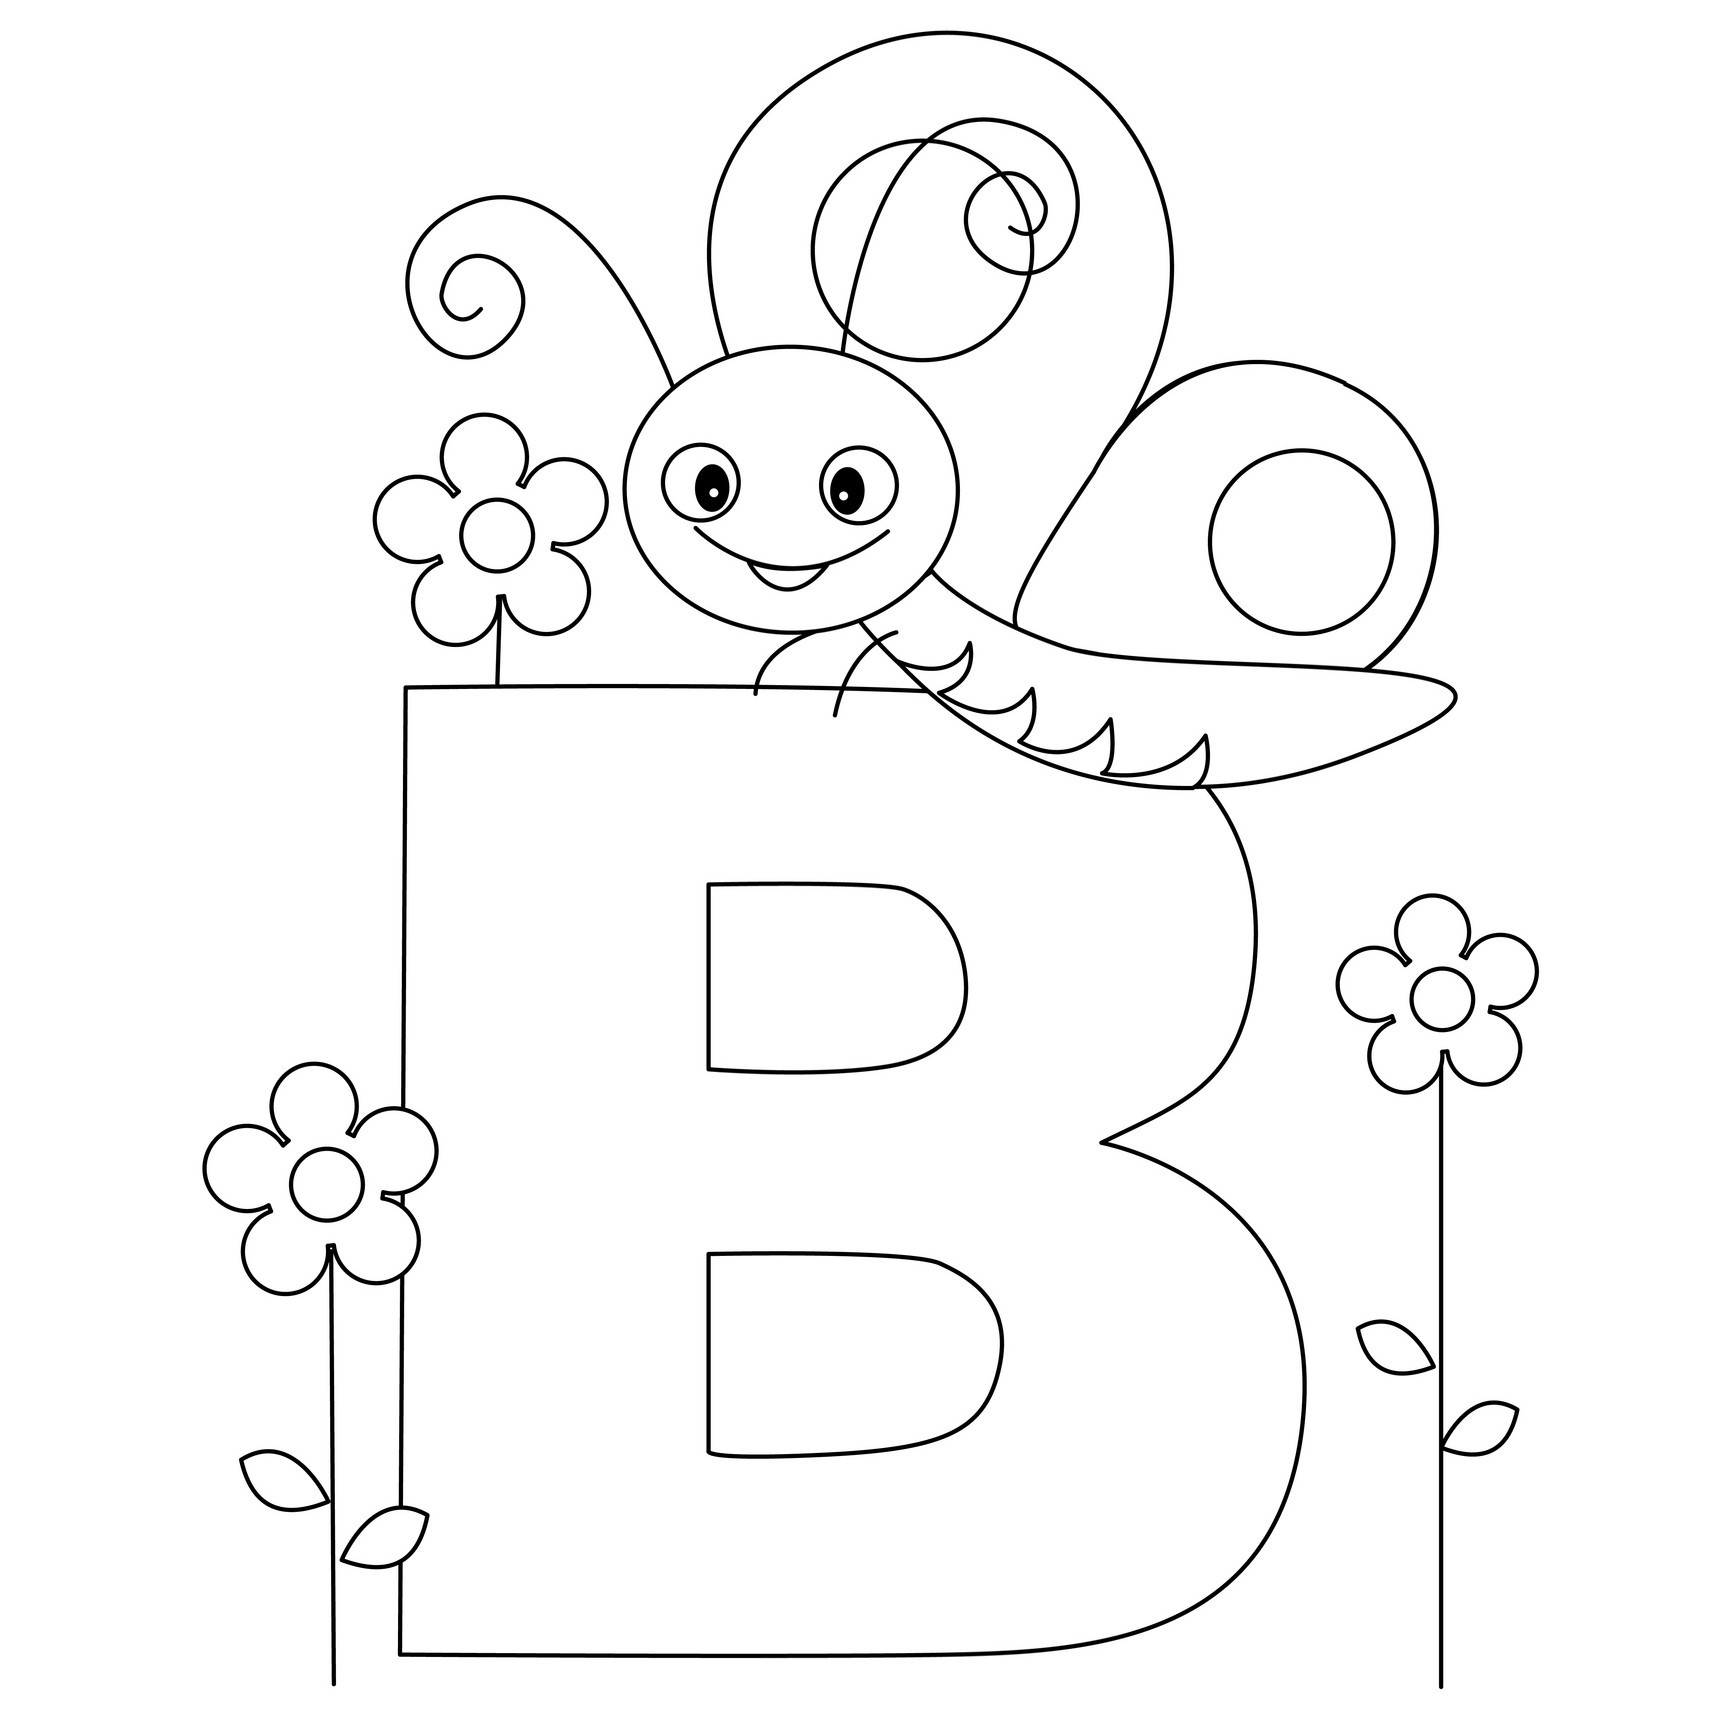 free printable alphabet coloring pages for kids best coloring pages for kids